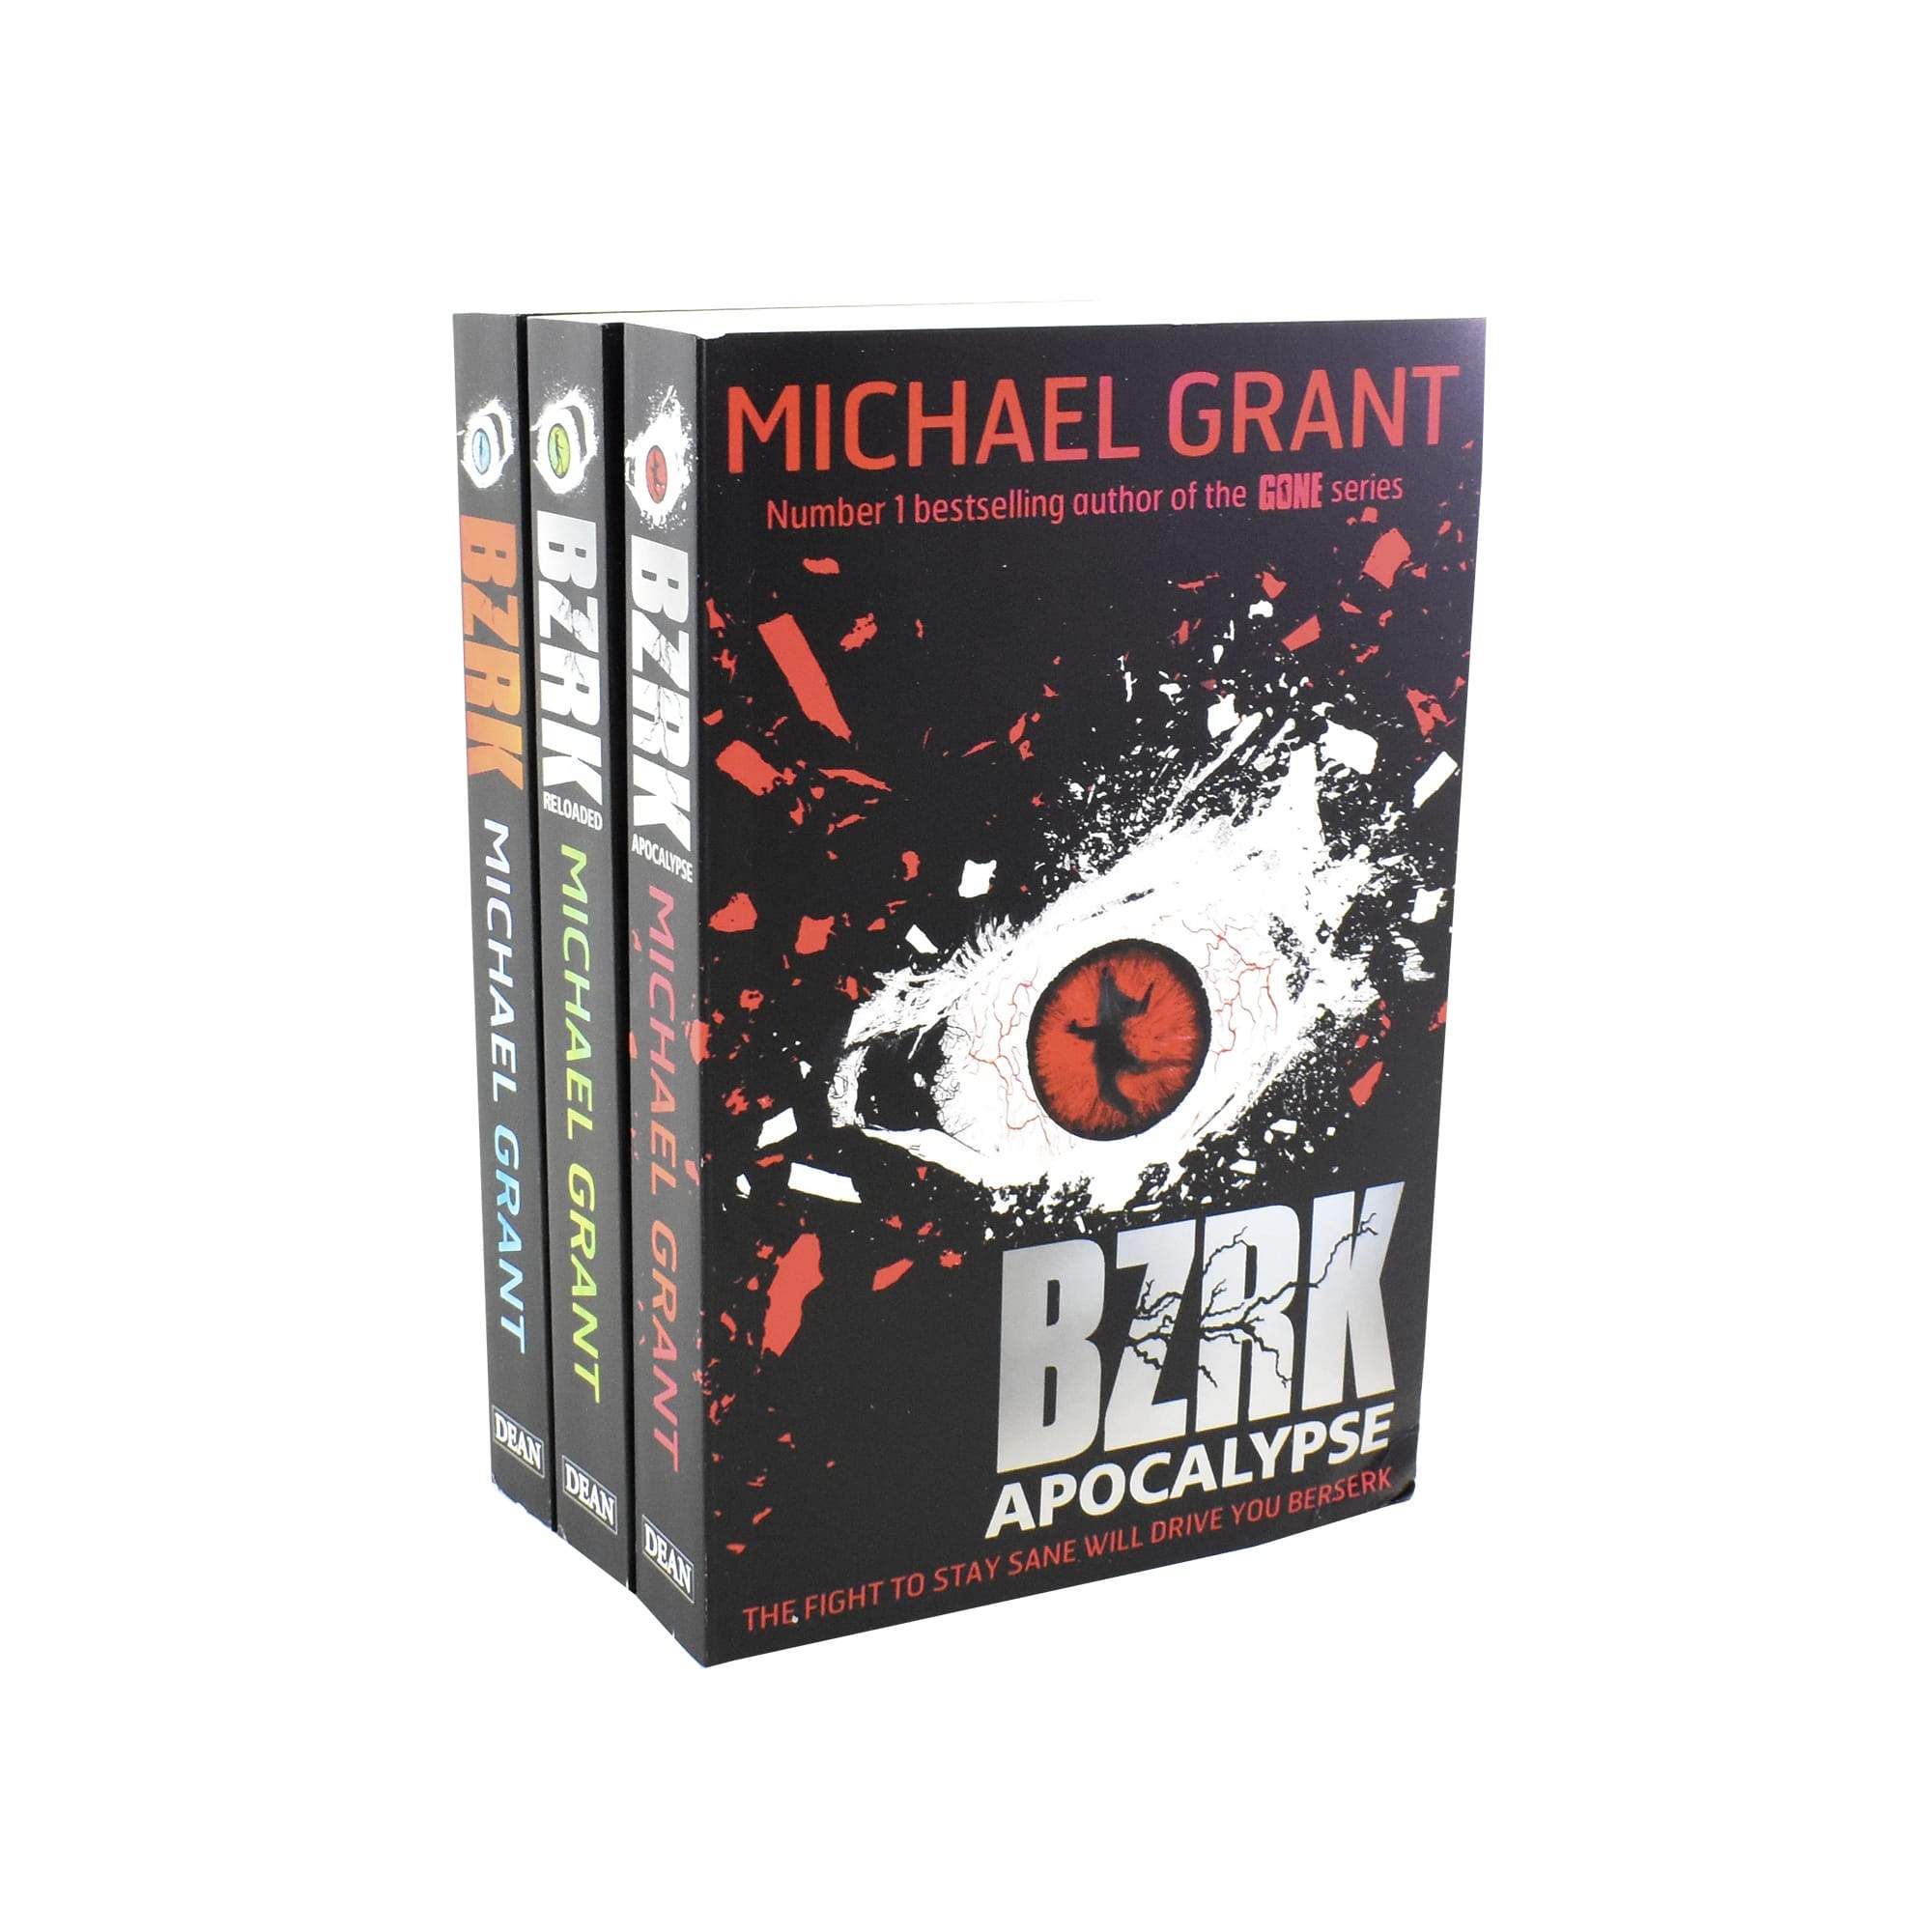 BZRK 3 Books Young Adult Collection Paperback Set By Michael Grant - St Stephens Books